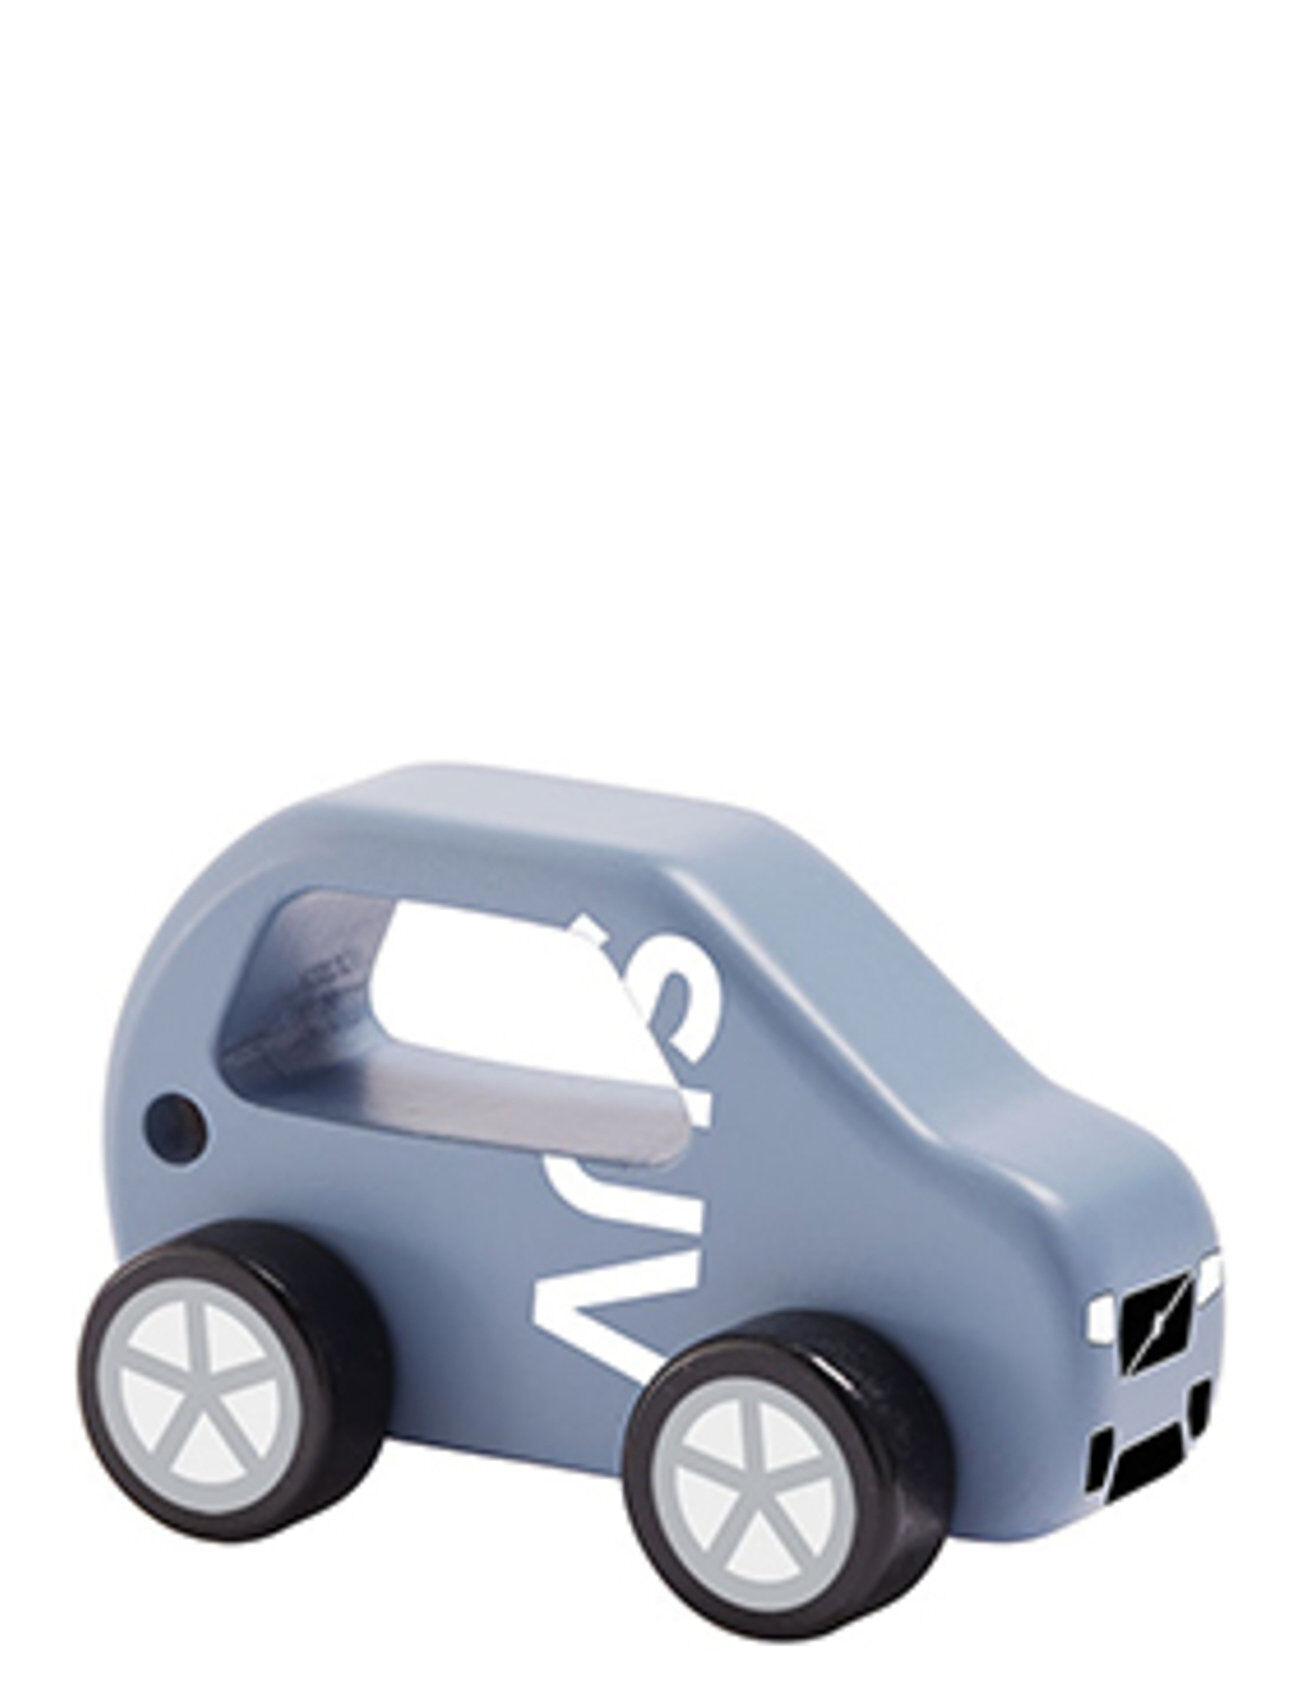 Kids Concept Suv Car Aiden Toys Toy Cars & Vehicles Toy Cars Blå Kids Concept